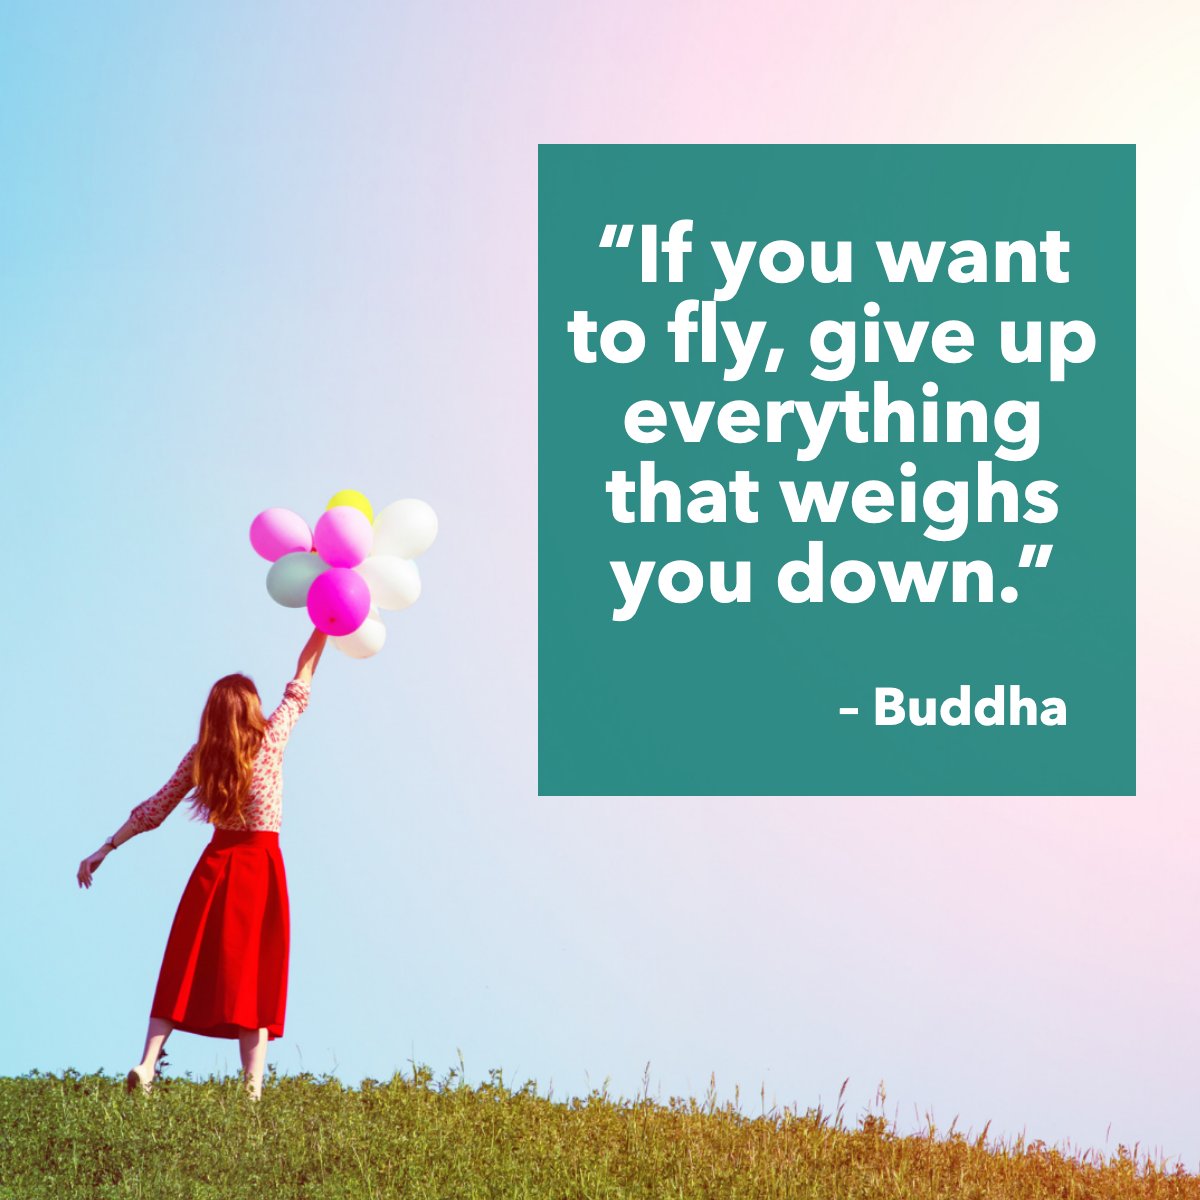 'If you want to flye, give up everything that weights you down'

-Buddha

#buddha #buddhaquotes  #quotegram #quoteoftheday✏️
 #RiversideRealestate #RiversideHomes #RiversideBroker #JamesCottrell #jamesforhomes